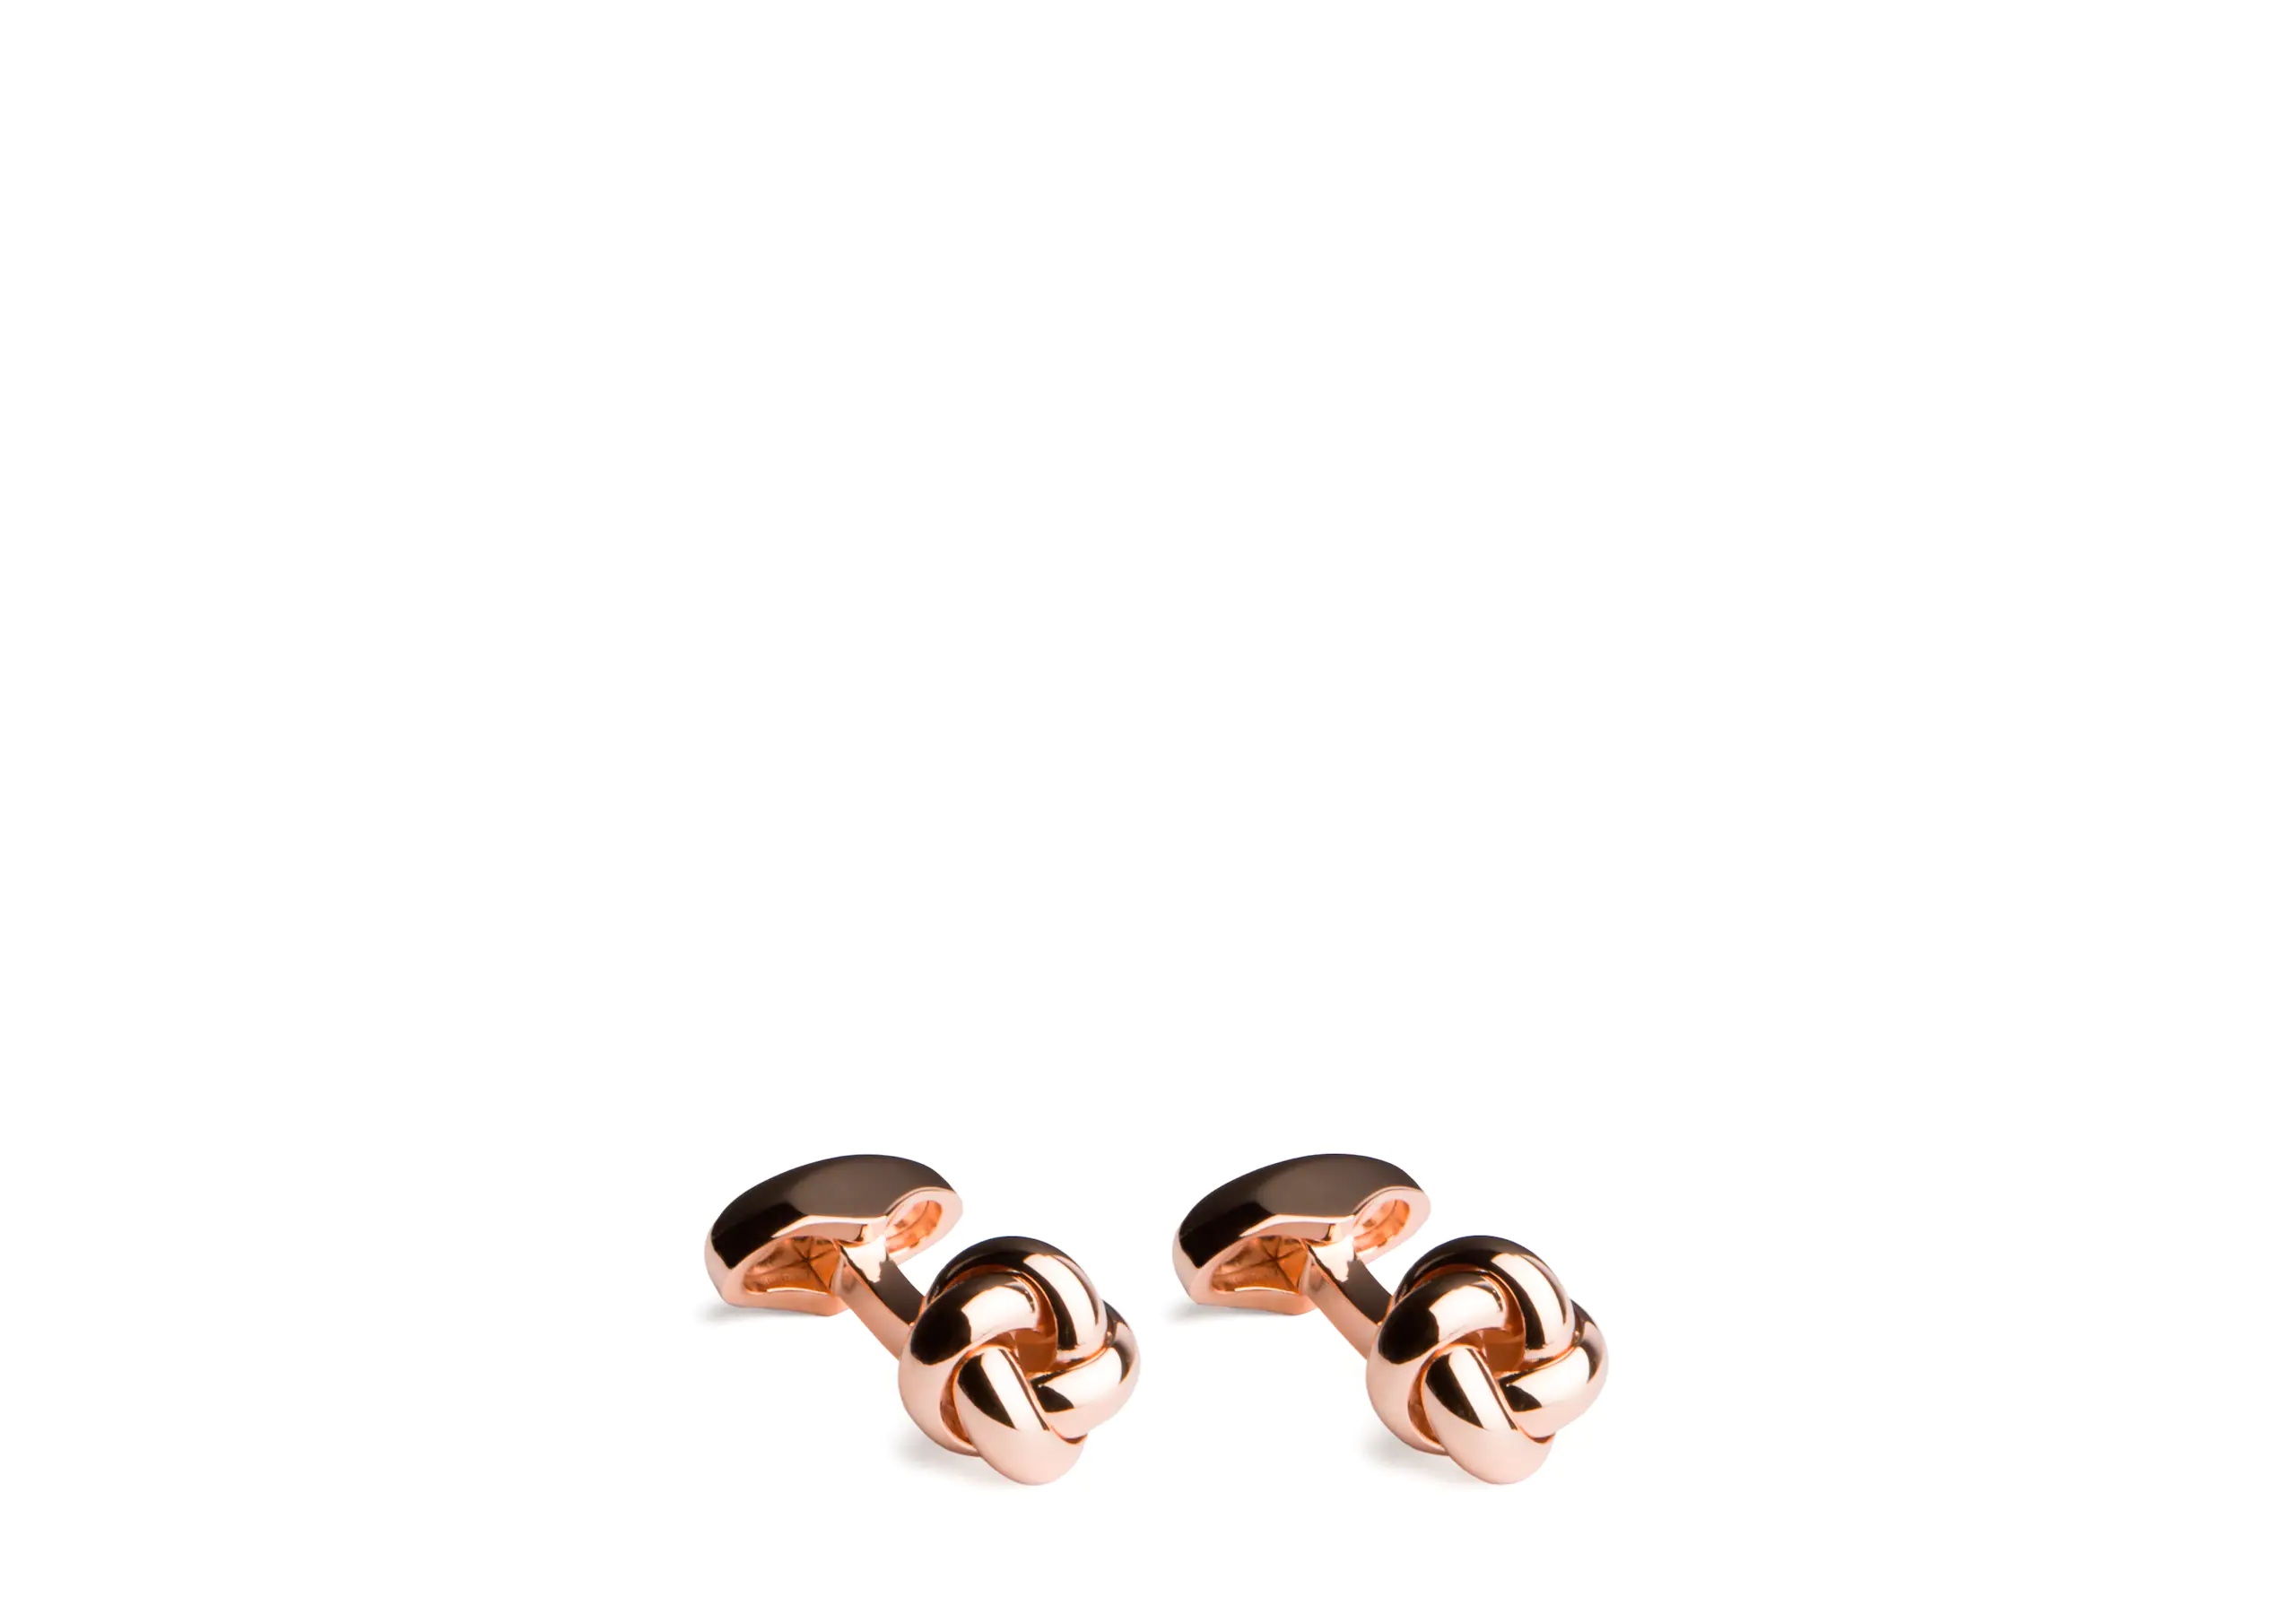 Knotted cufflink
Rhodium Plated Knot Rose gold - 1